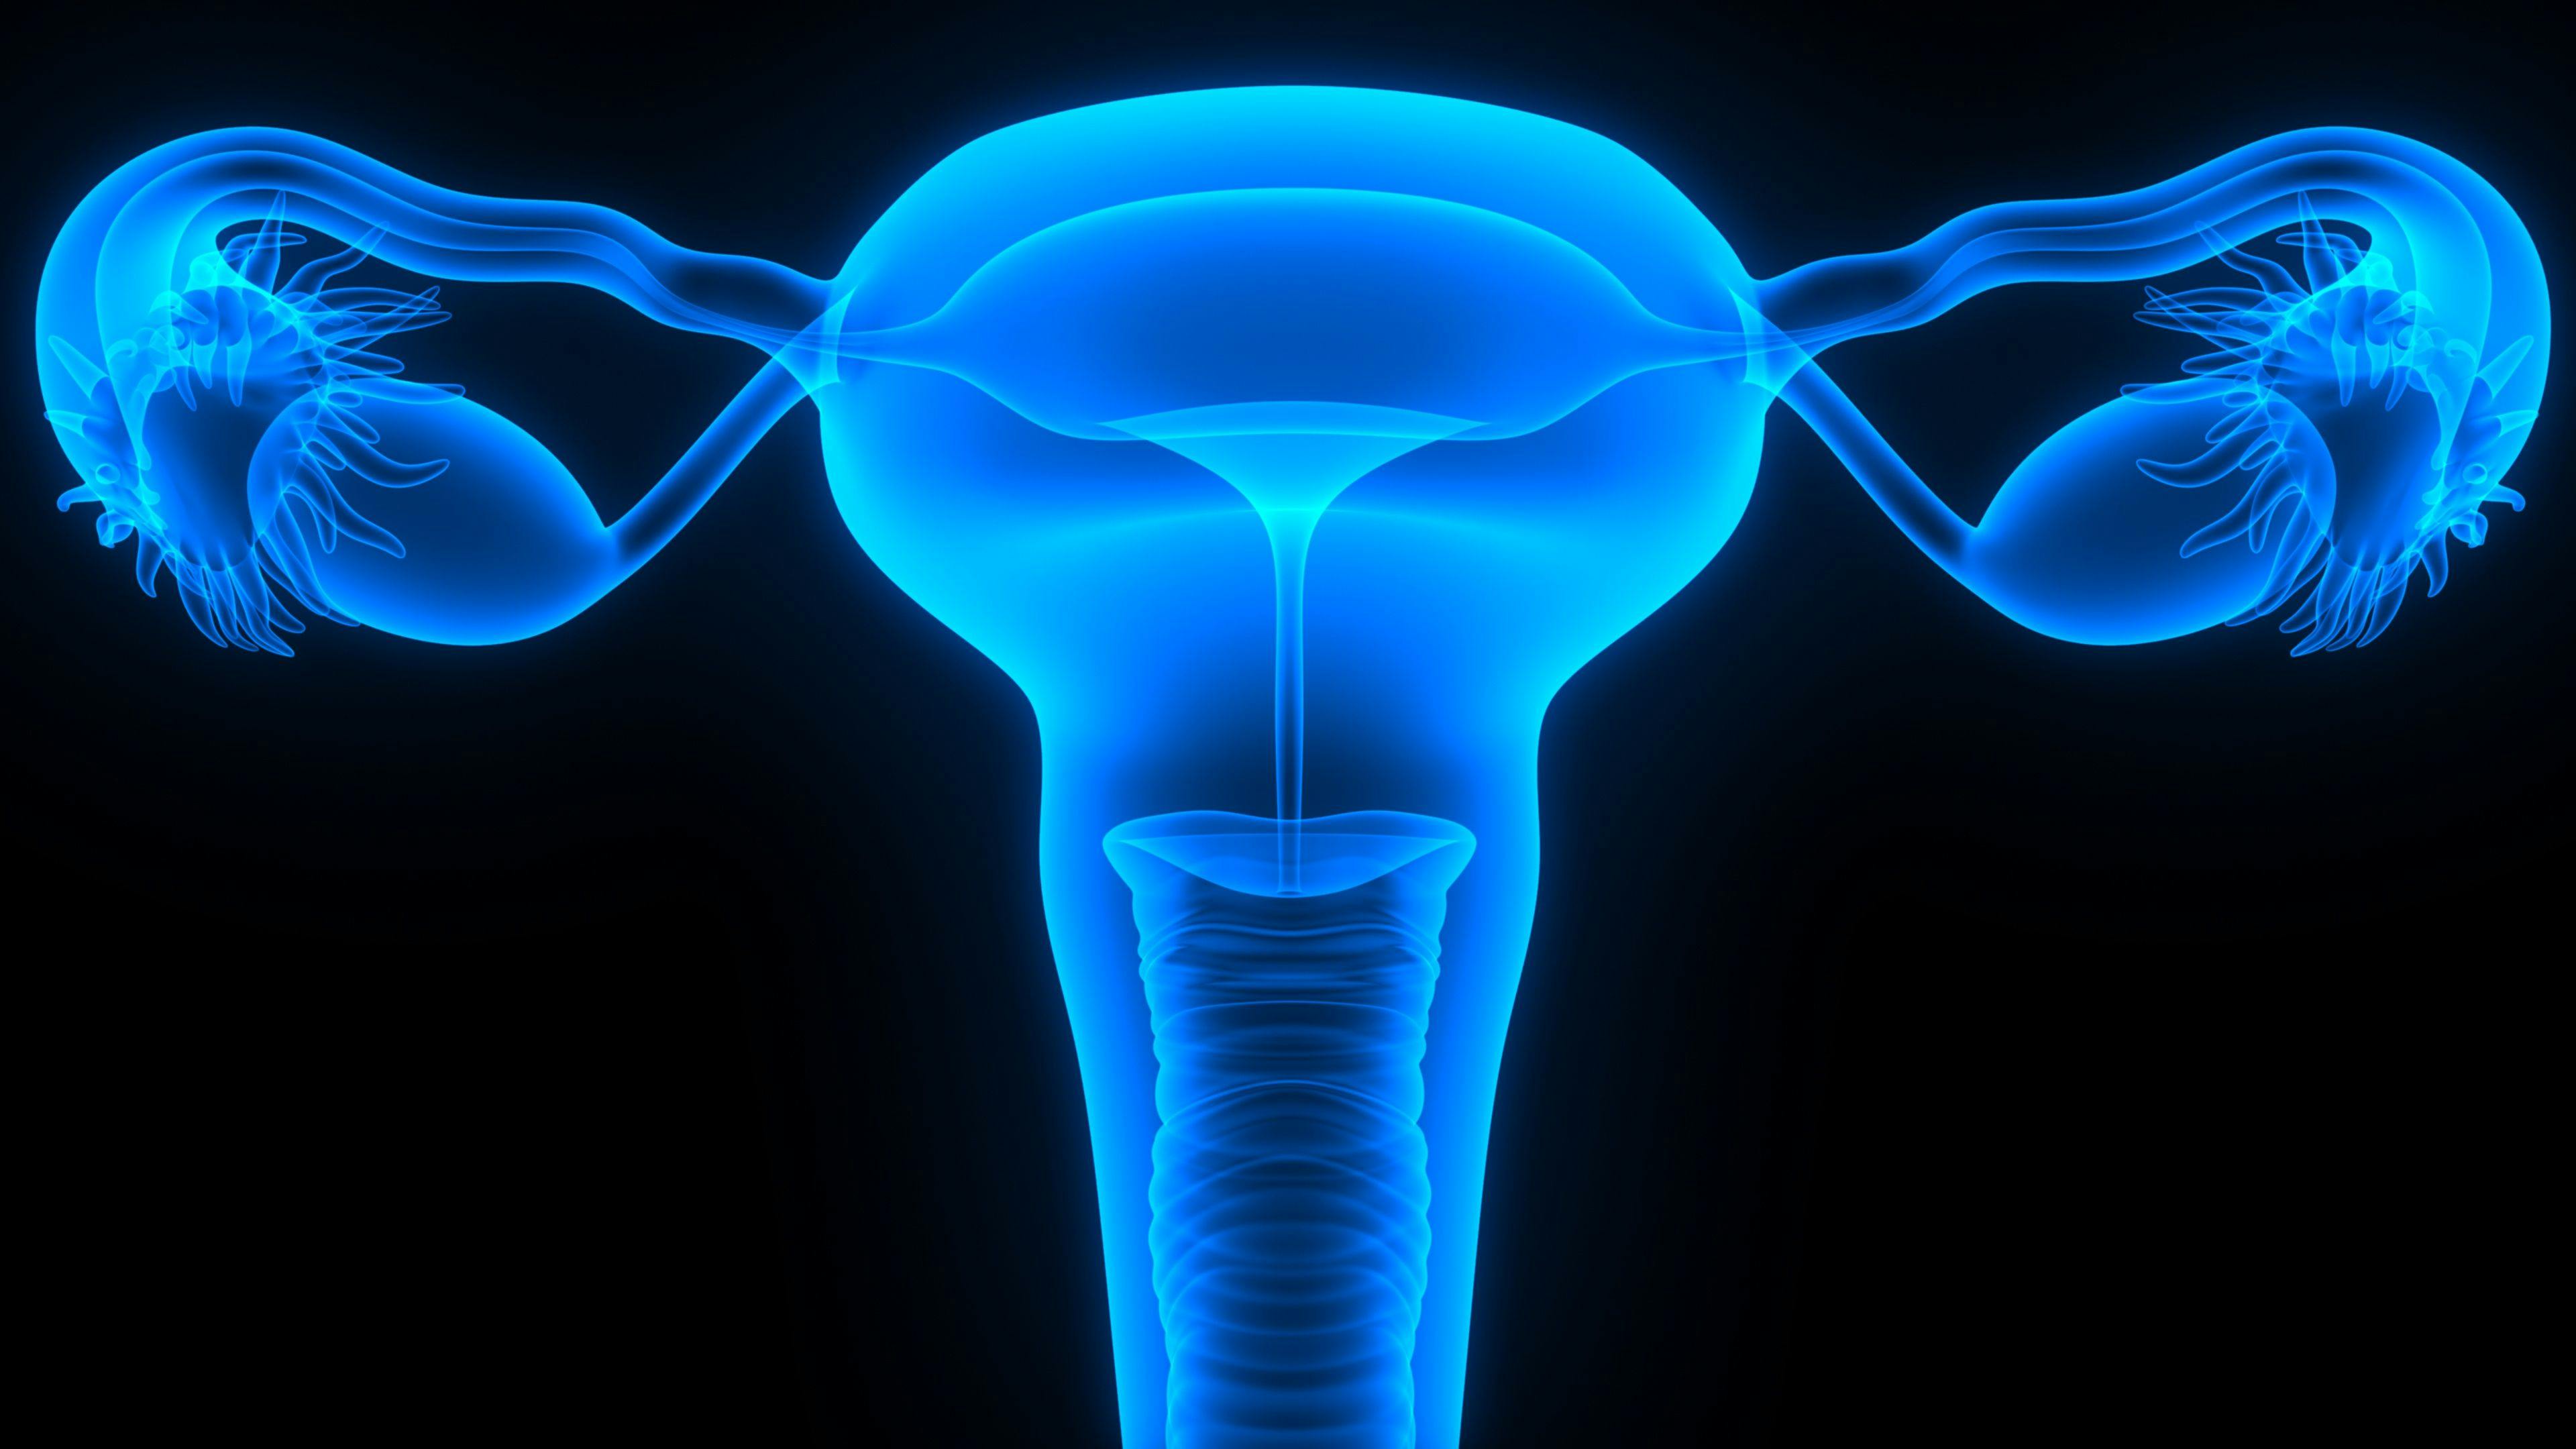 Screening Methods for Detecting Ovarian Cancer Early Ineffective at Reducing Mortality